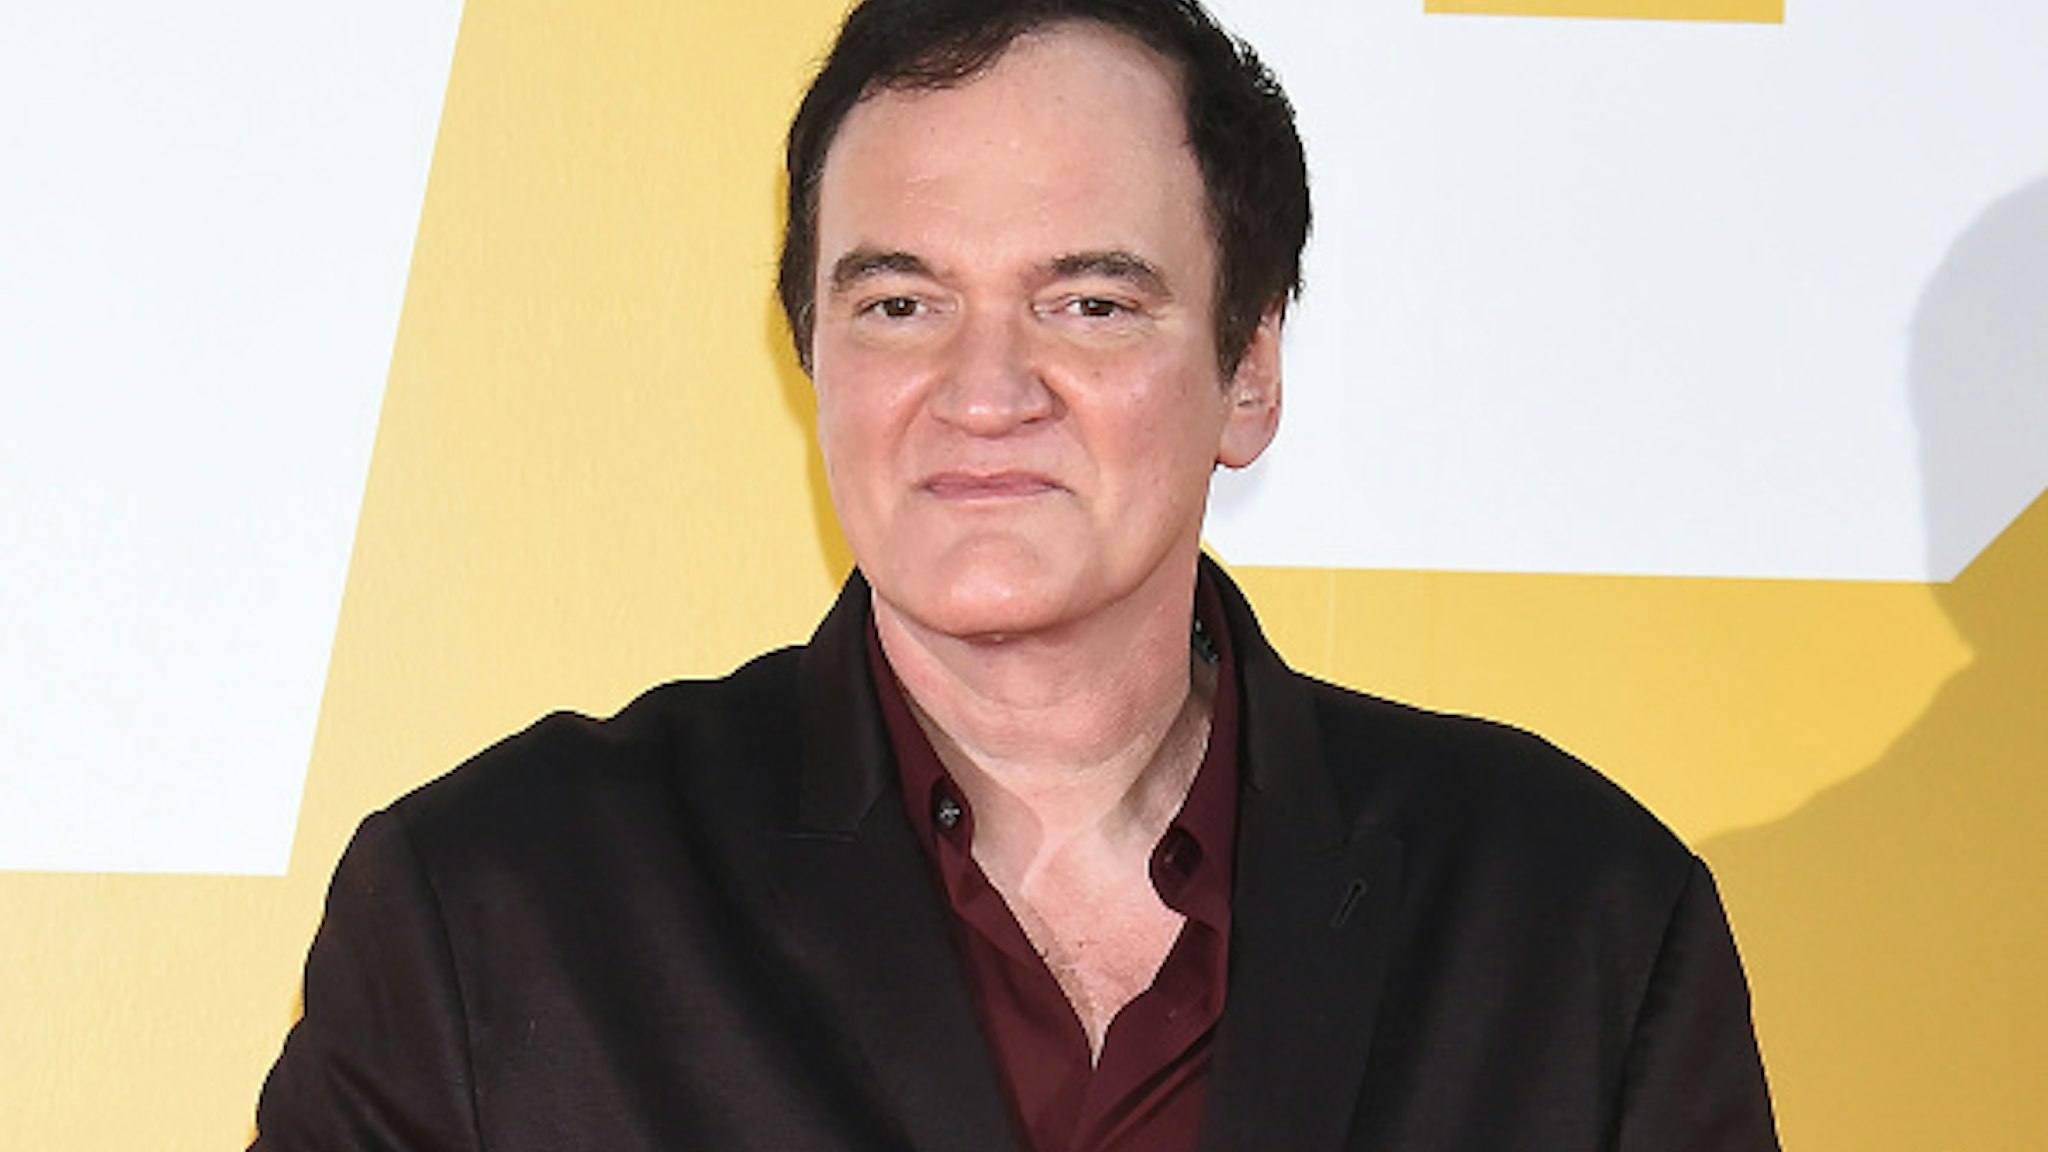 TOKYO, JAPAN - AUGUST 26: Director Quentin Tarantino attends the Japan premiere of 'Once Upon A Time In Hollywood' on August 26, 2019 in Tokyo, Japan.